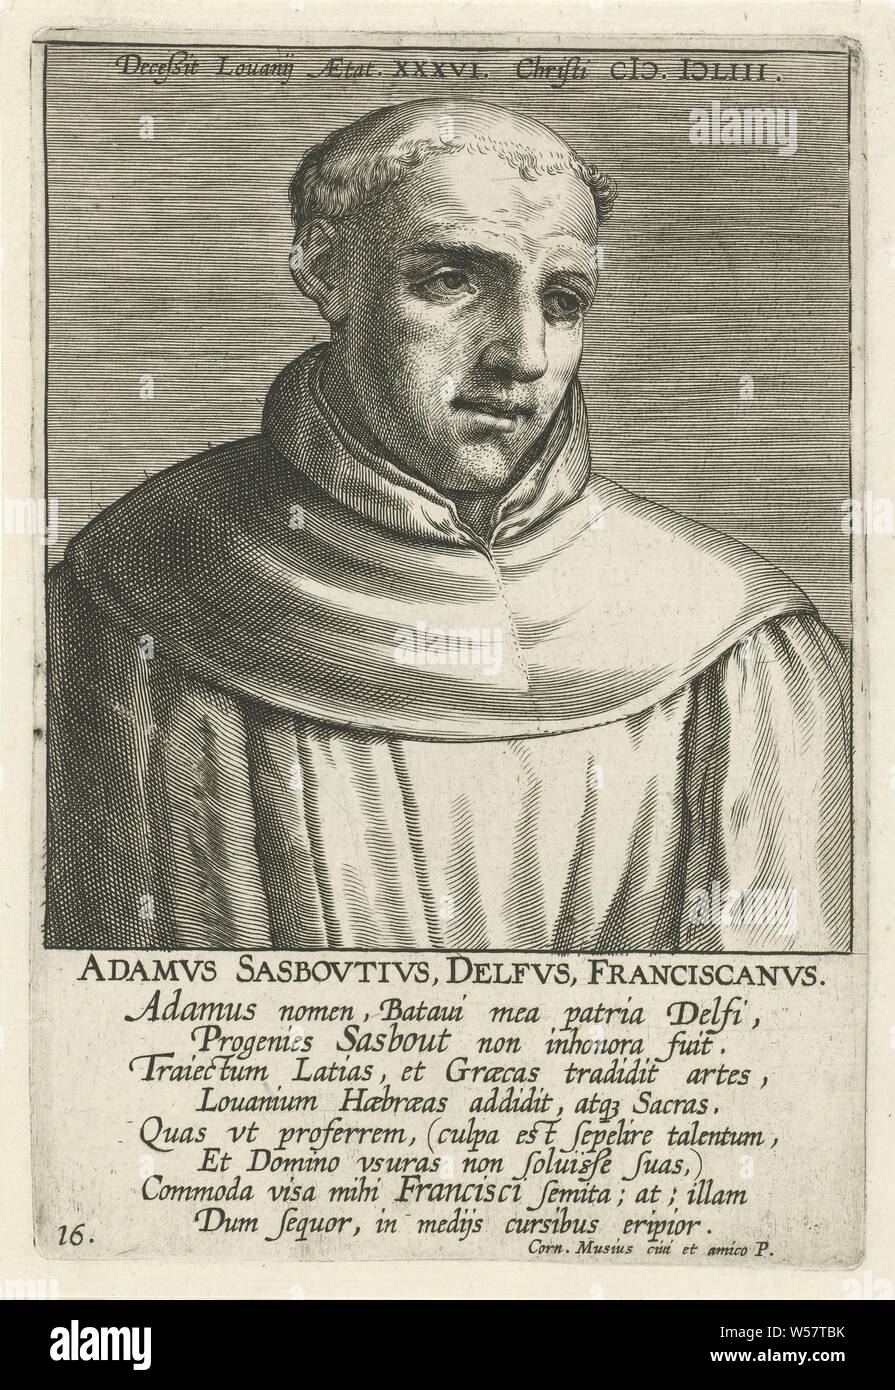 Portrait of Adam Sasbout Adamvs Sasbovtivs Delfvs Franciscanvs (title on object) Portraits of famous Dutch and Flemish scholars (series title) Illustrium Galliae Belgicae icones et elogi (series title), Portrait of Adam Sasbout Franciscan monk and professor of theology in Leuven. Bust to the right. The print has a Latin top and signature and is part of a series of famous Dutch and Flemish scholars, Adam Sasbout, Philips Galle (attributed to workshop of), Antwerp, 1604, paper, engraving, h 163 mm × w 110 mm Stock Photo